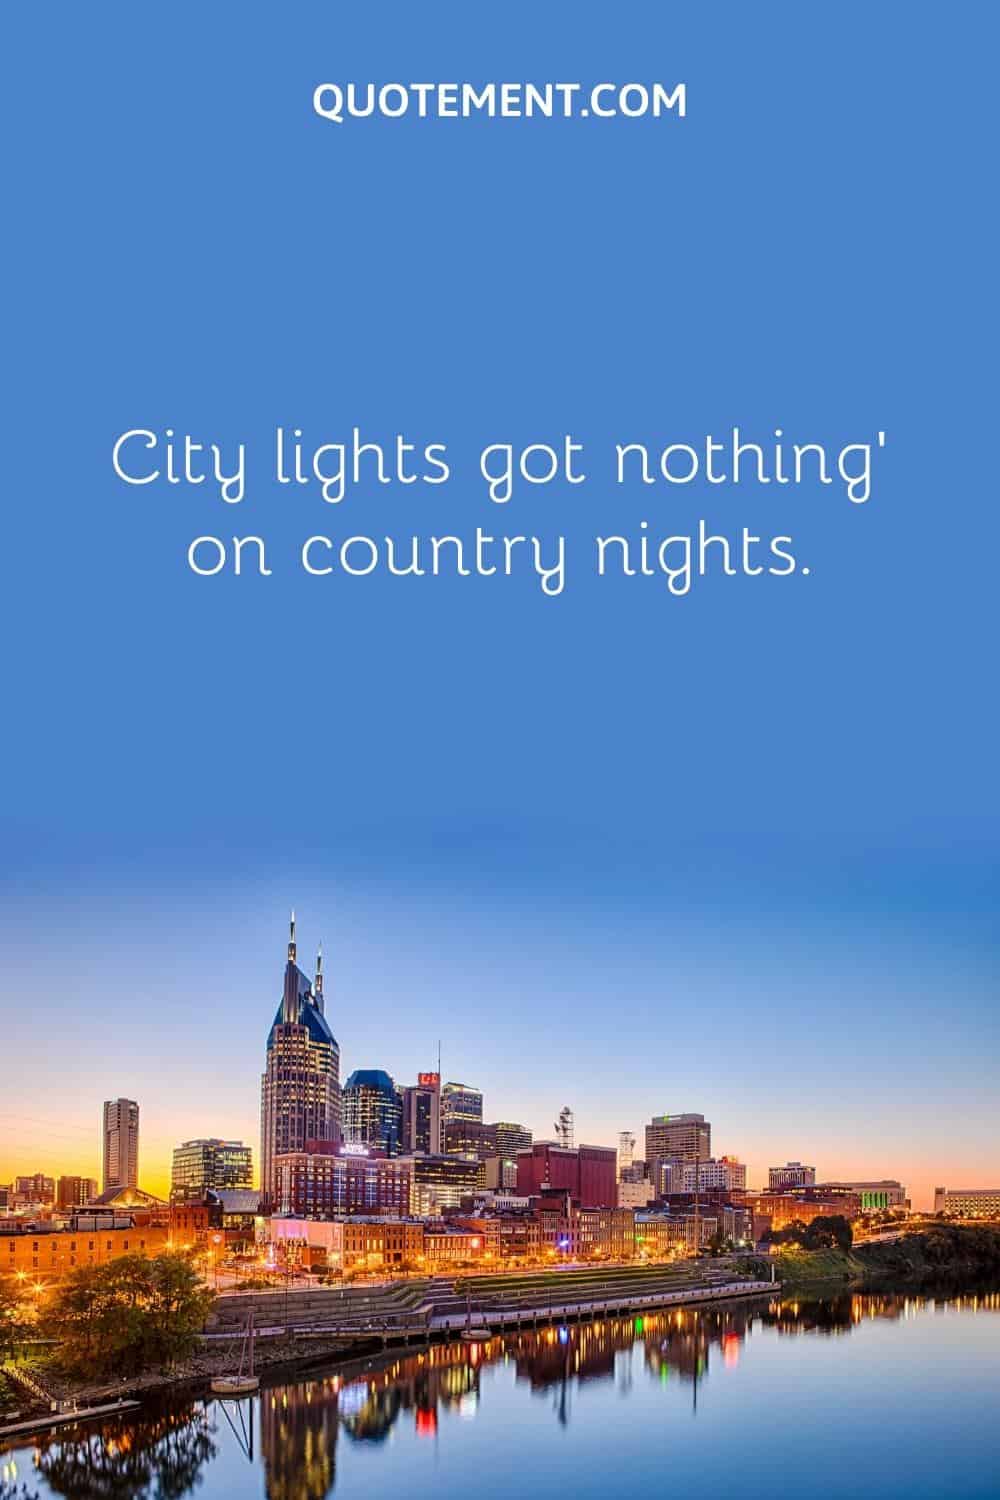 City lights got nothing’ on country nights.